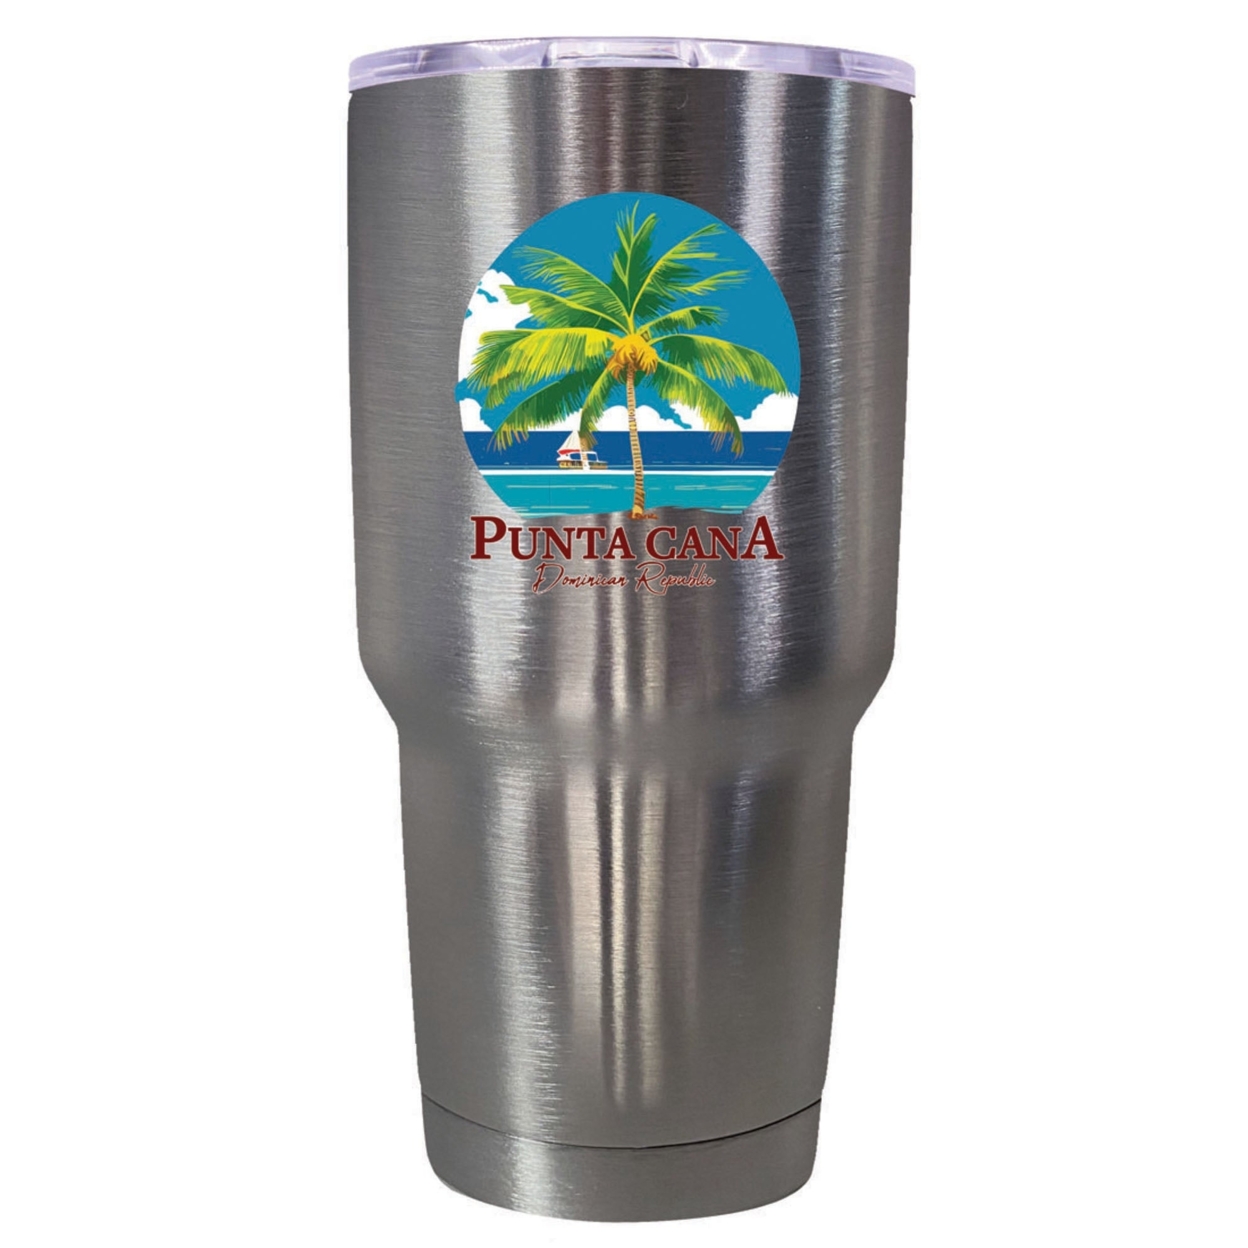 Punta Cana Dominican Republic Souvenir 24 Oz Insulated Stainless Steel Tumbler - Coral, PARROT